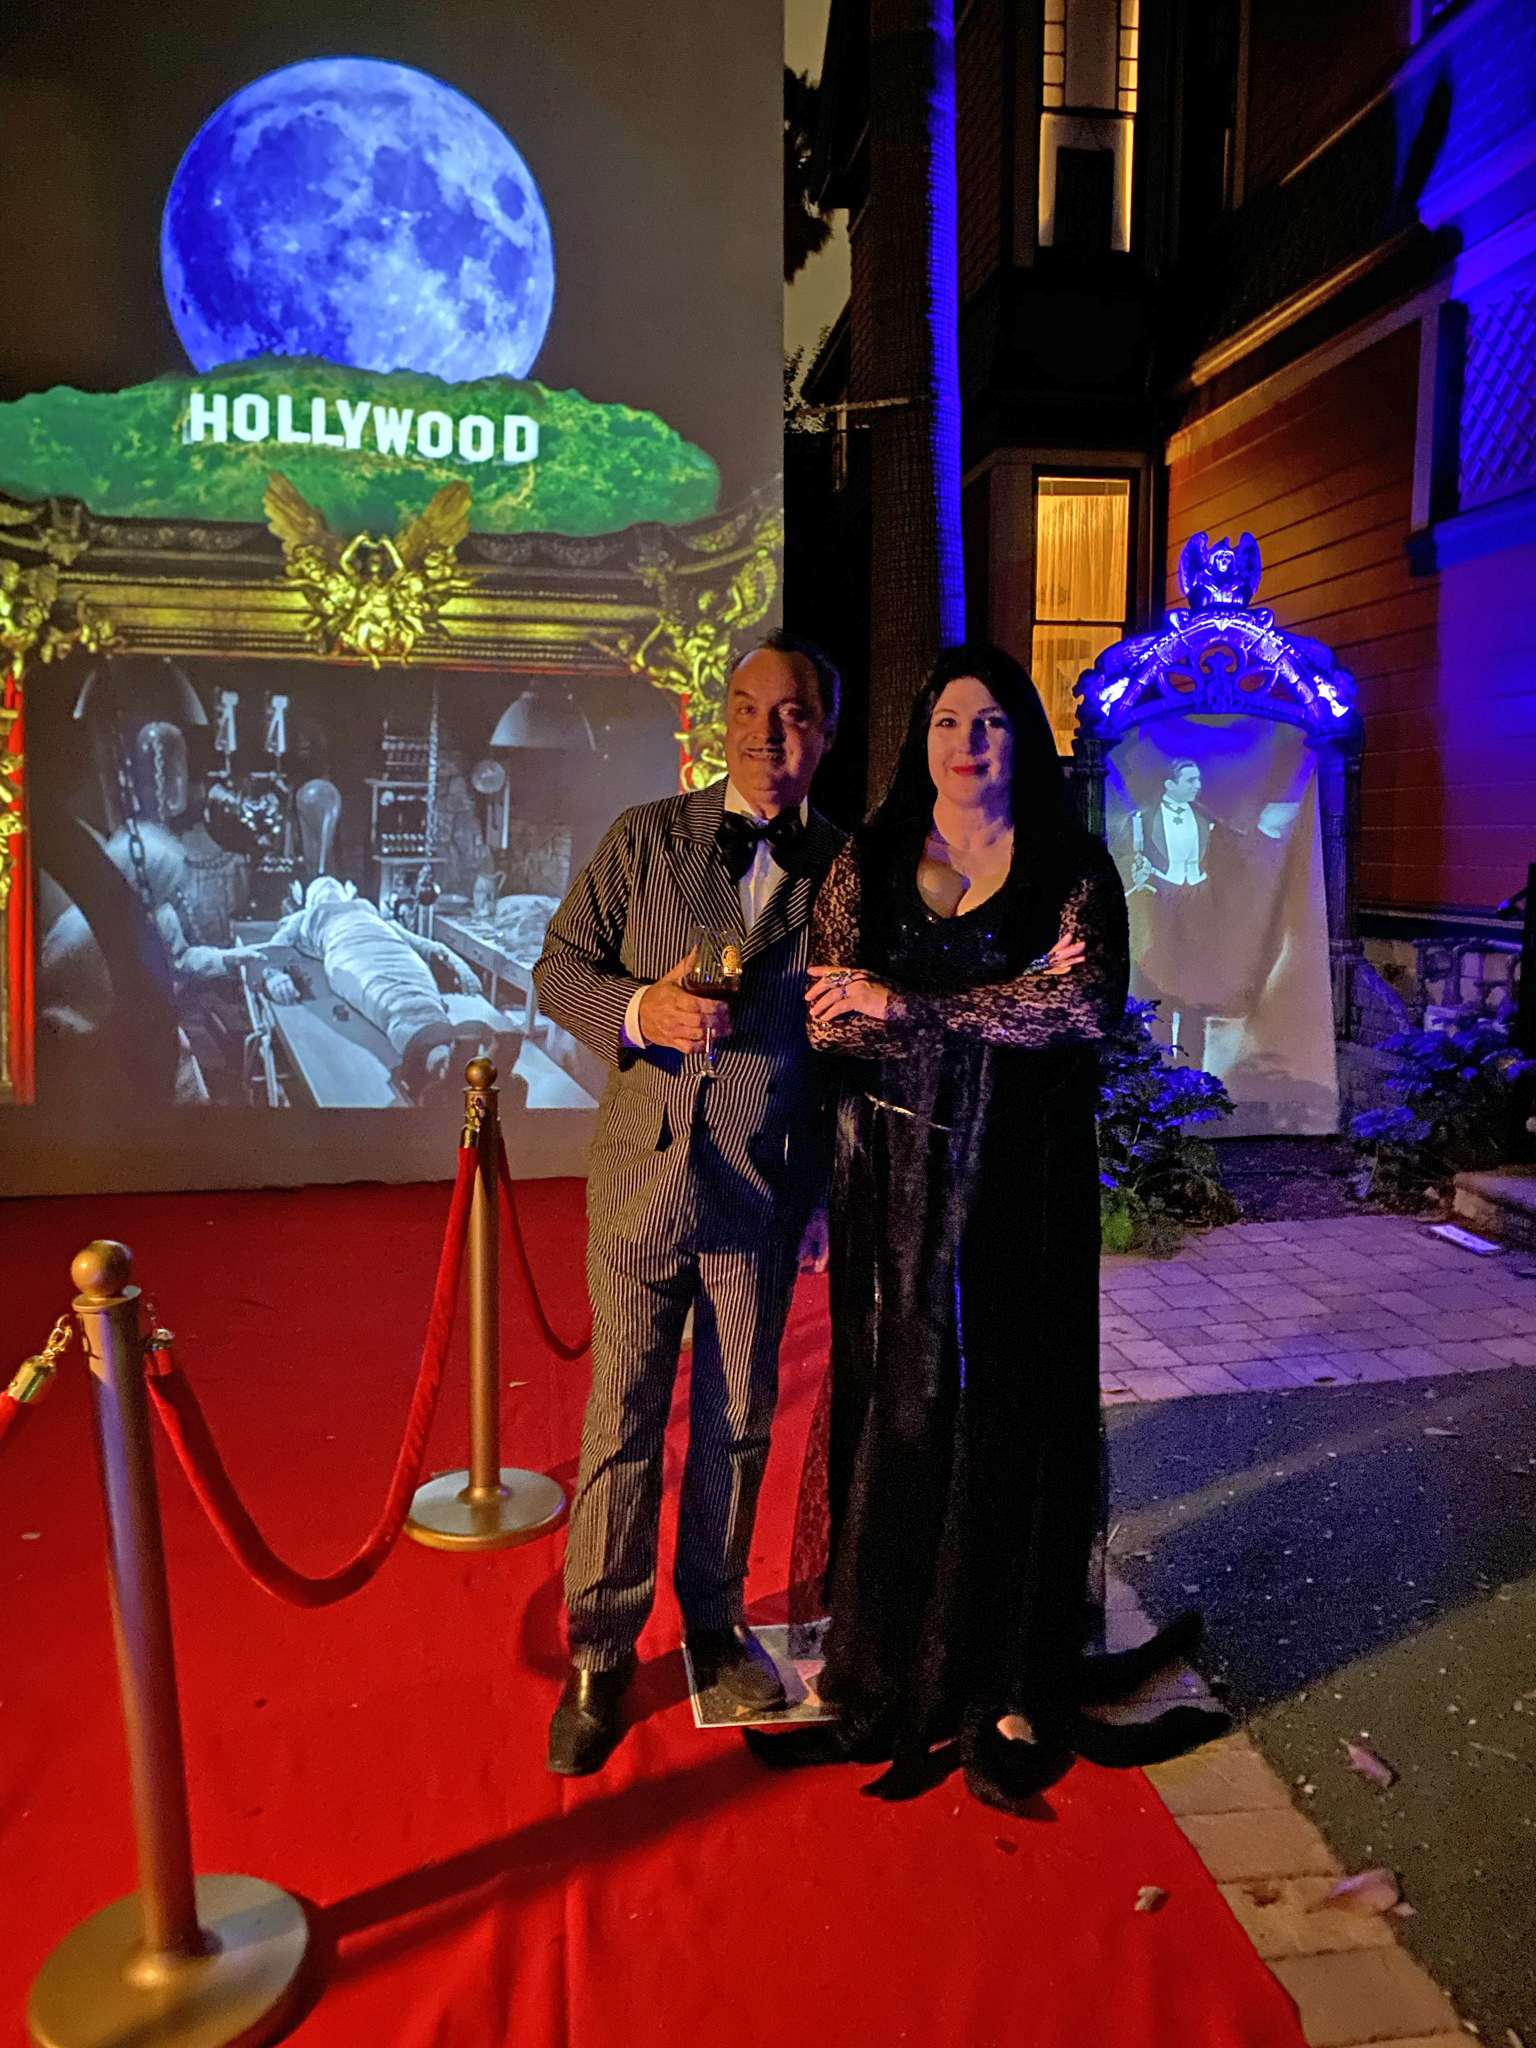 Strike a Pose on our Red Carpet for Haunted Hollywood